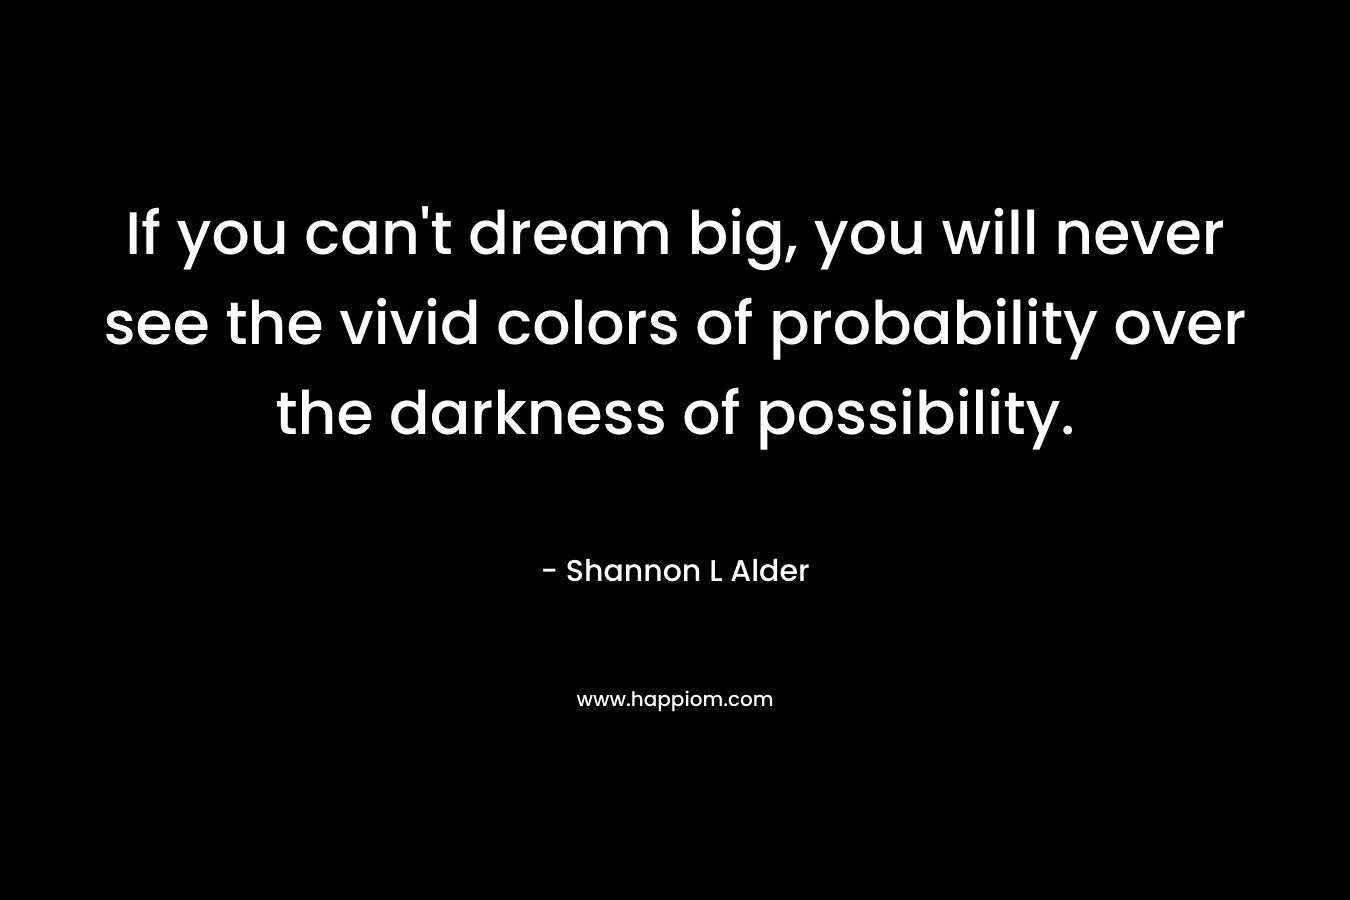 If you can't dream big, you will never see the vivid colors of probability over the darkness of possibility.